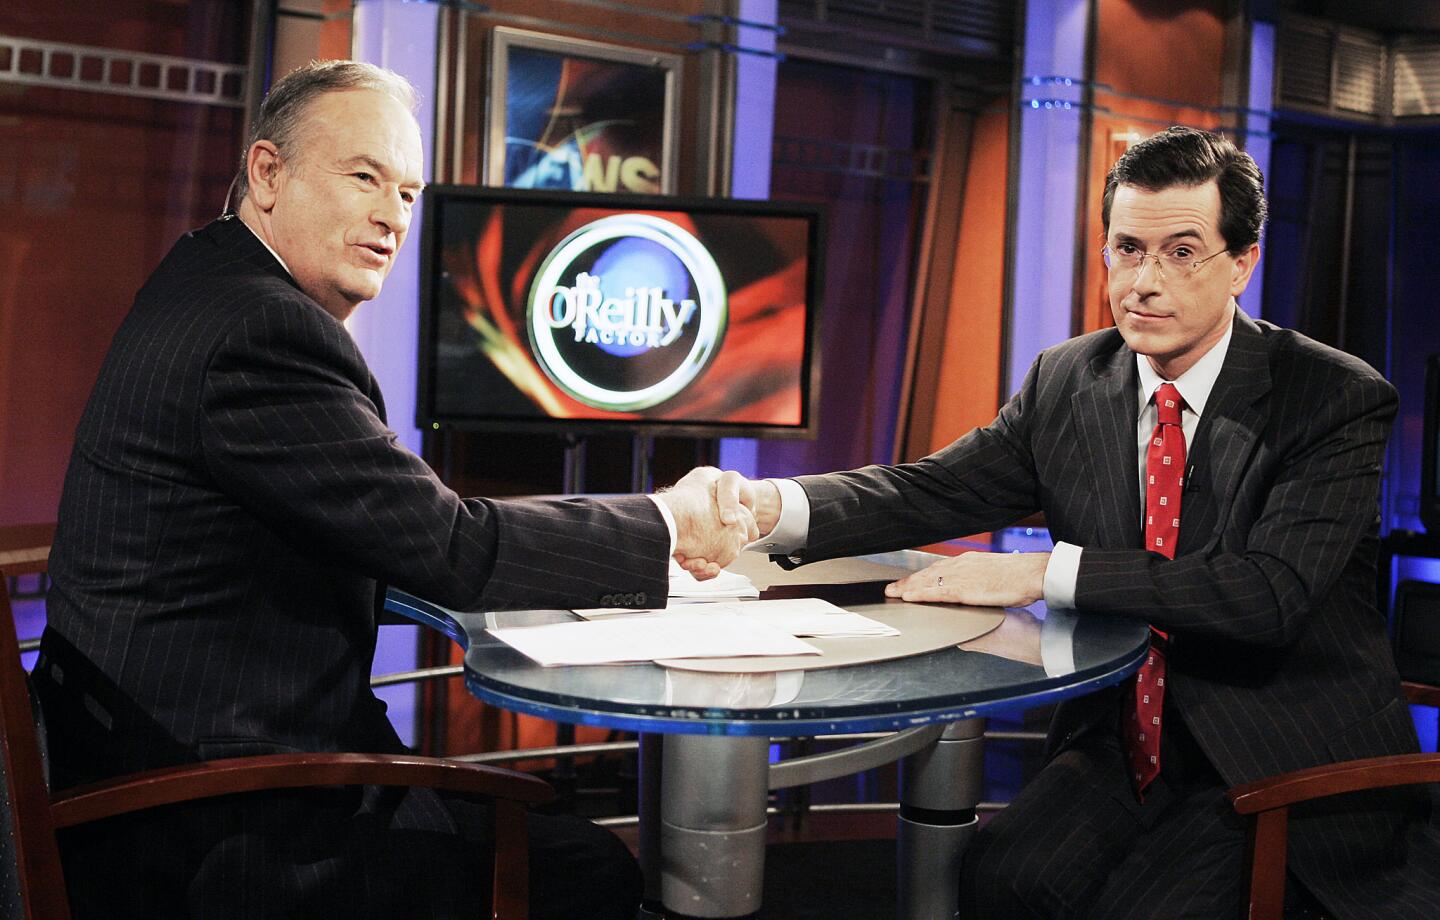 Bill O'Reilly and Stephen Colbert